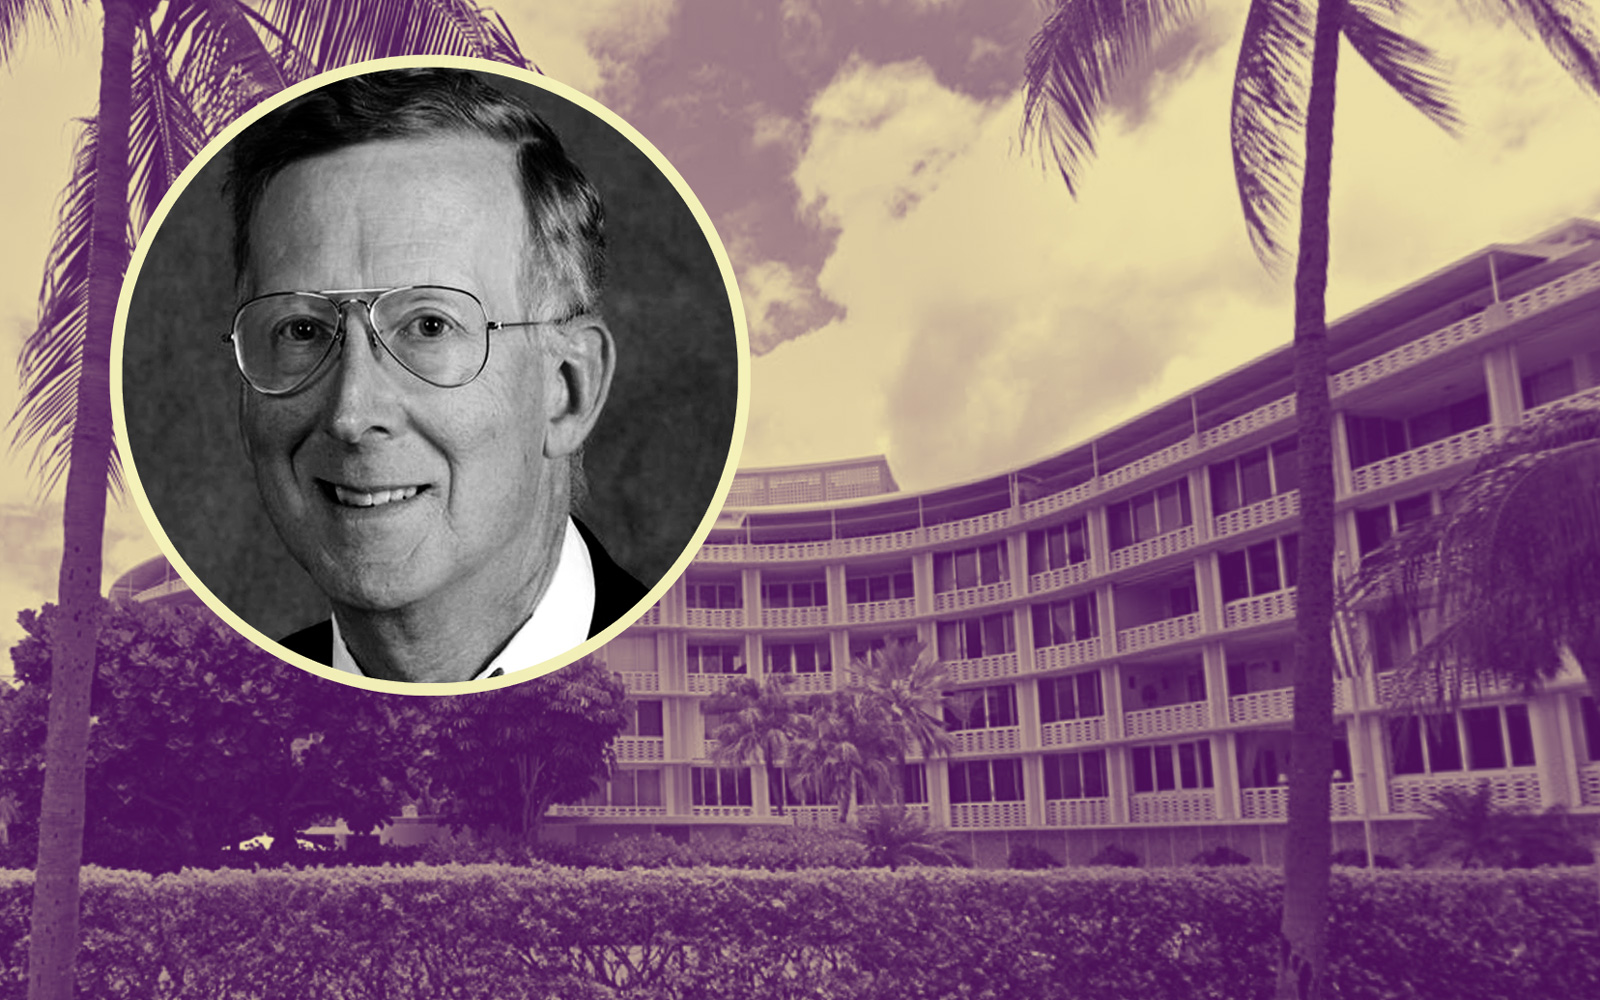 Member of billionaire Collier family buys Palm Beach penthouse